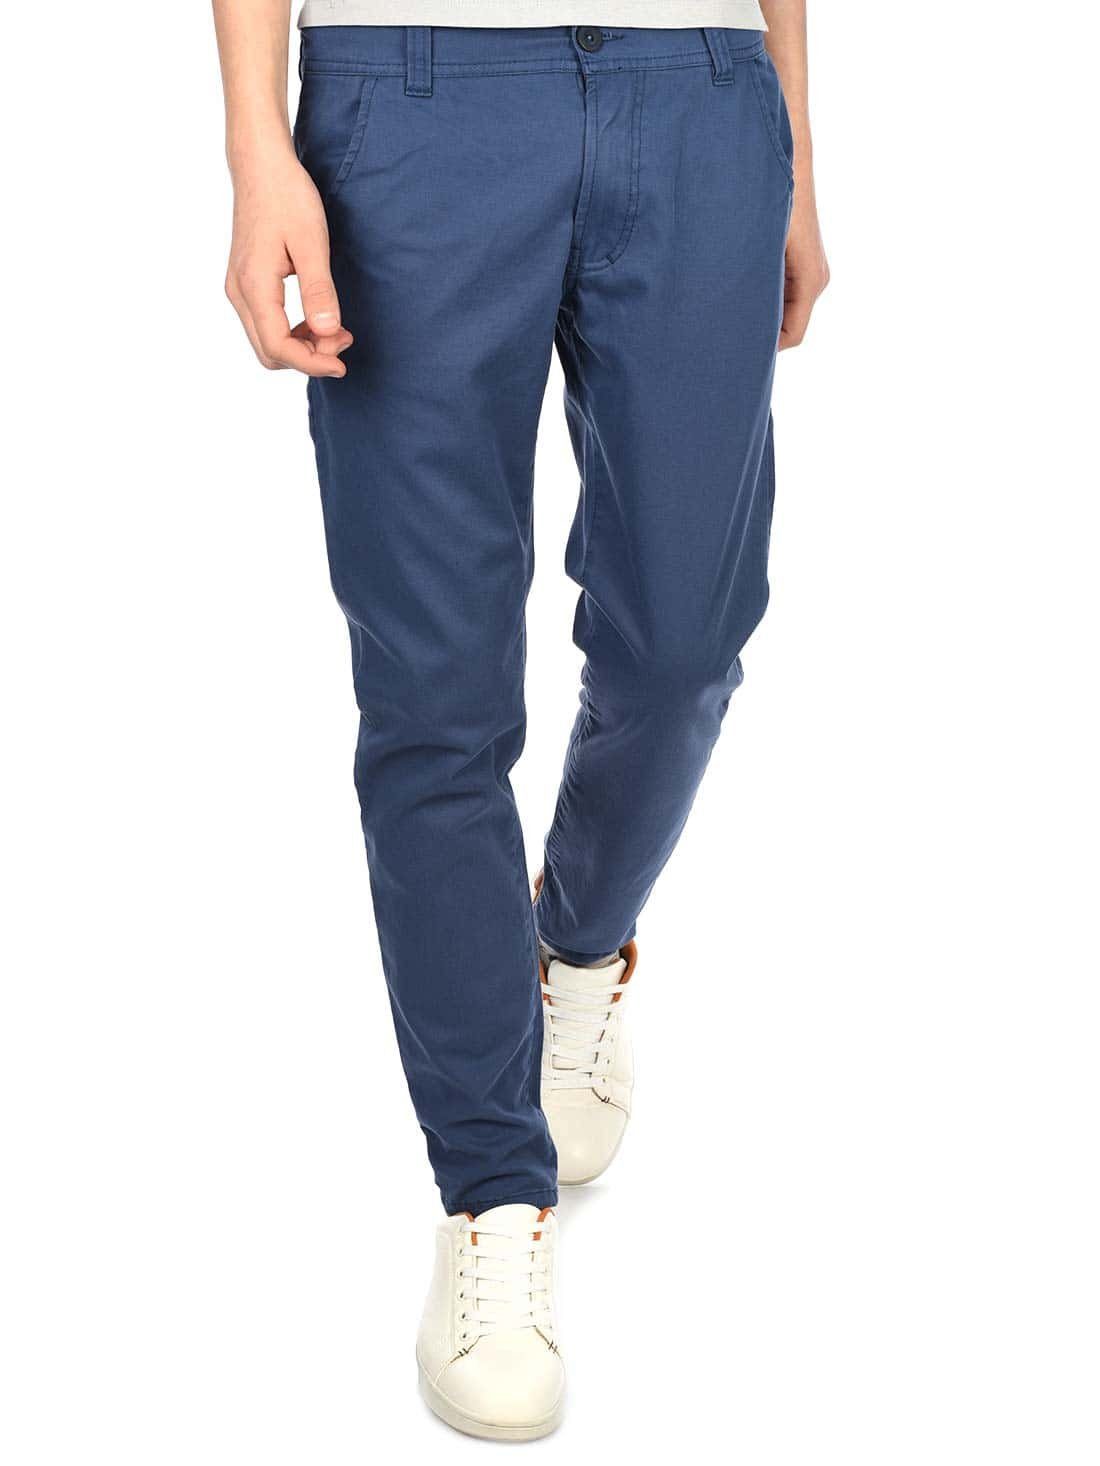 BEZLIT Chinohose Jungen Chino Hose casual Jeansblau (1-tlg)